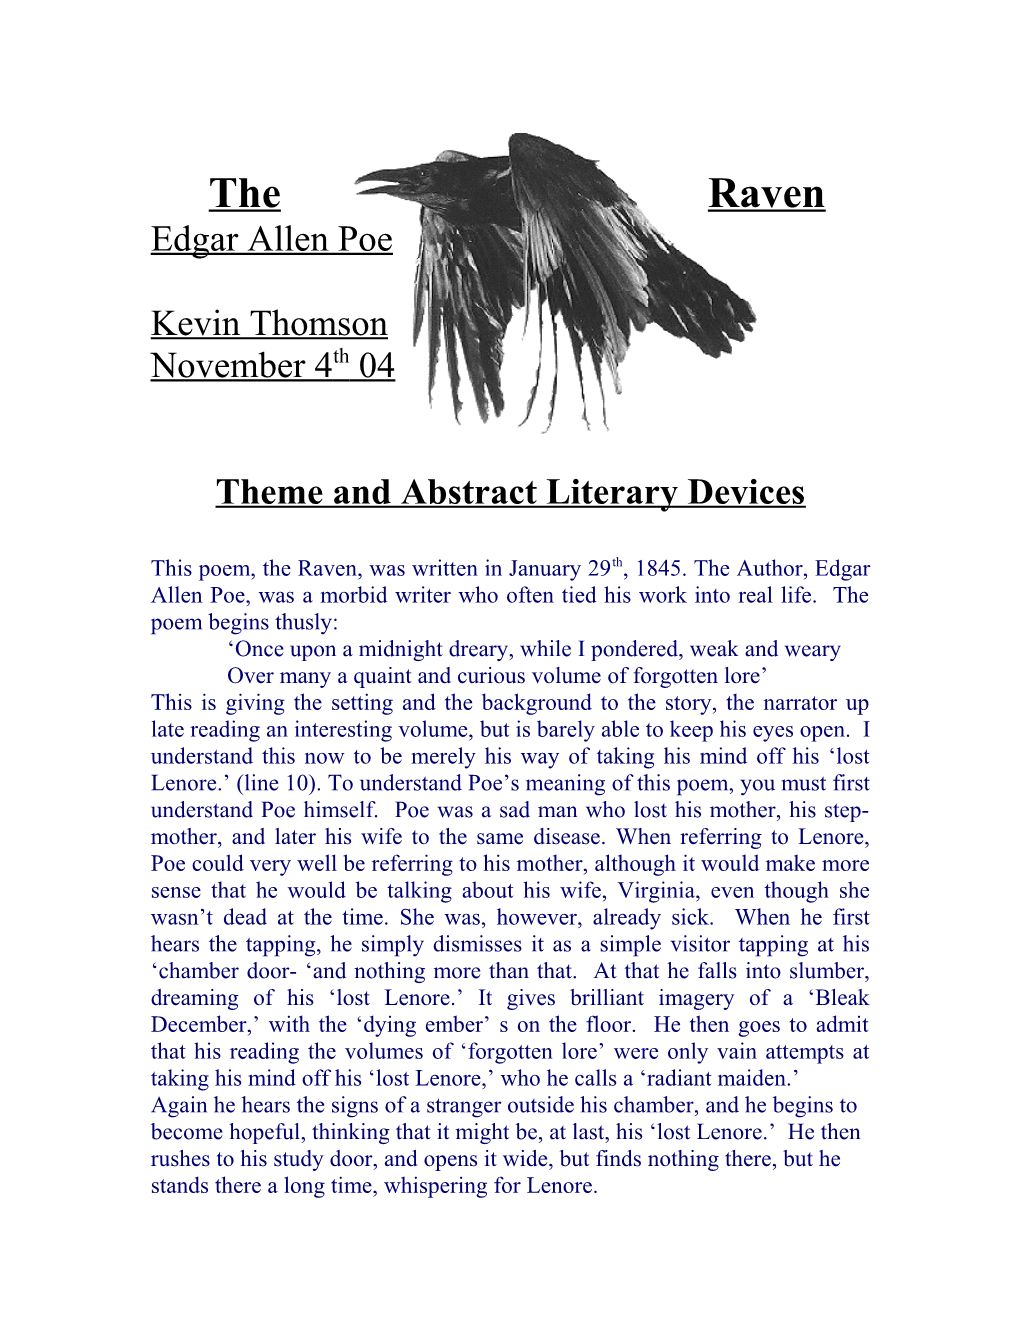 Theme and Abstract Literary Devices